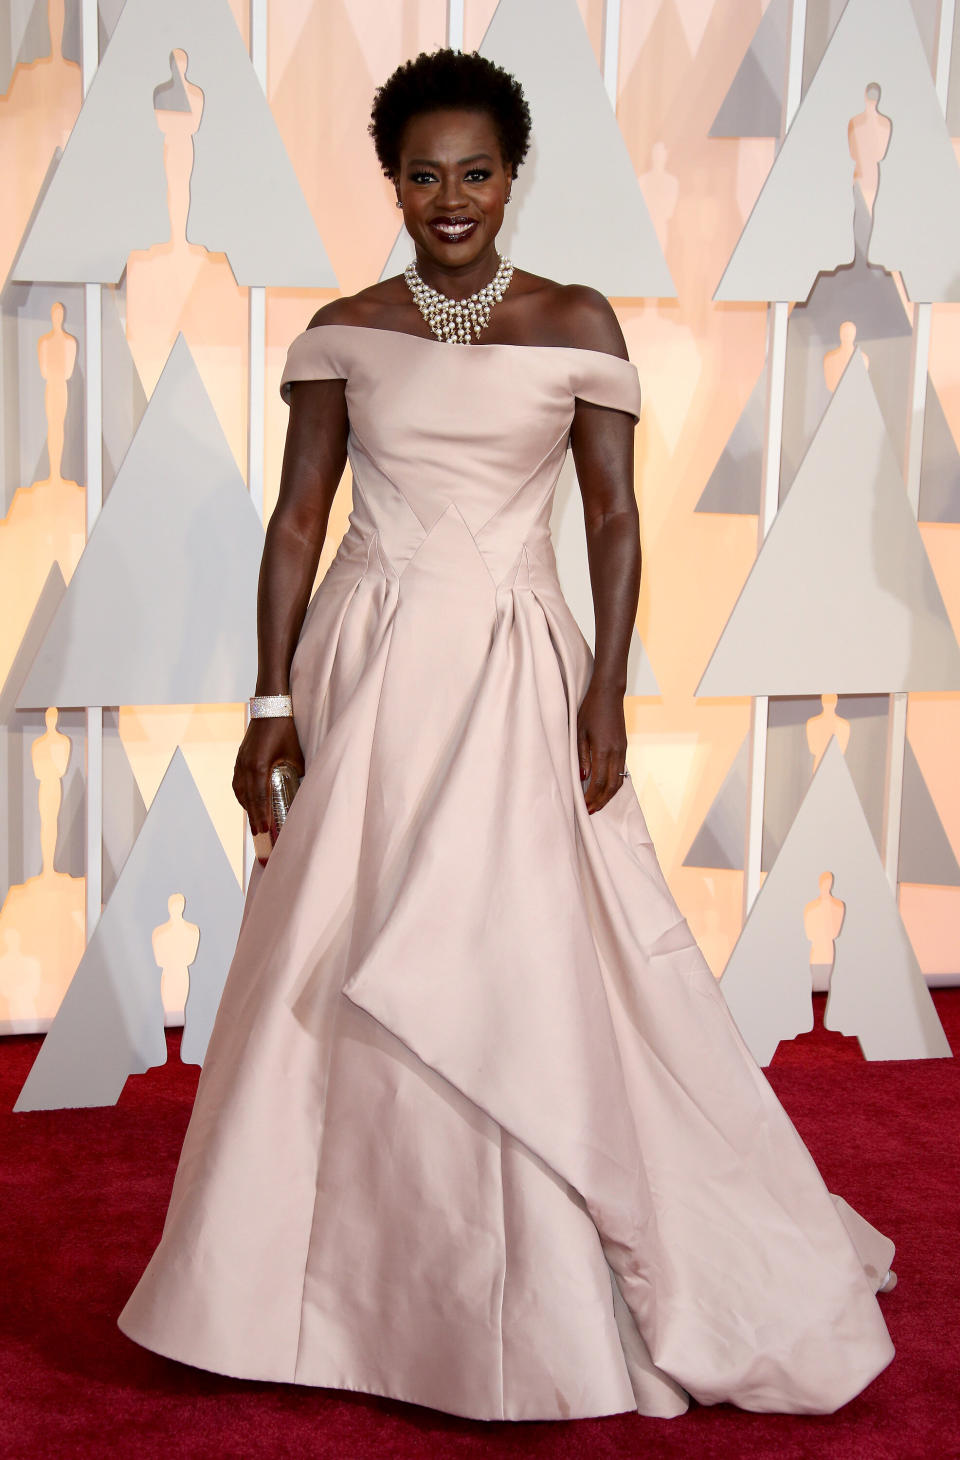 Viola Davis at the 87th annual Academy Awards in Los Angeles on Feb. 22, 2015.